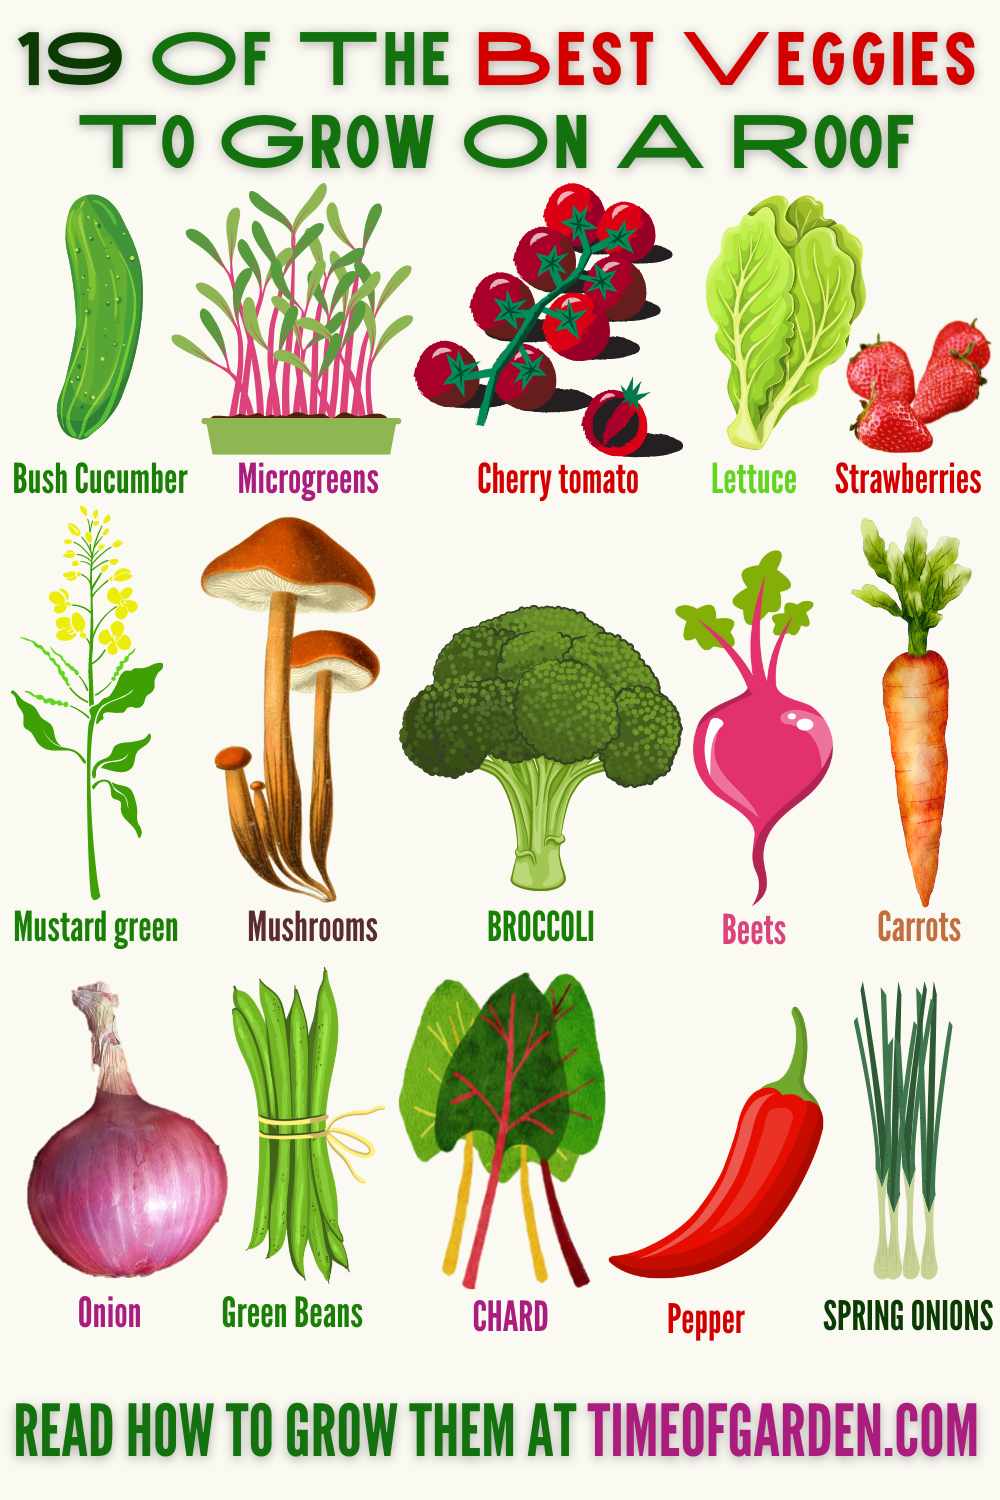 19 Of The Best Veggies To Grow On A Roof